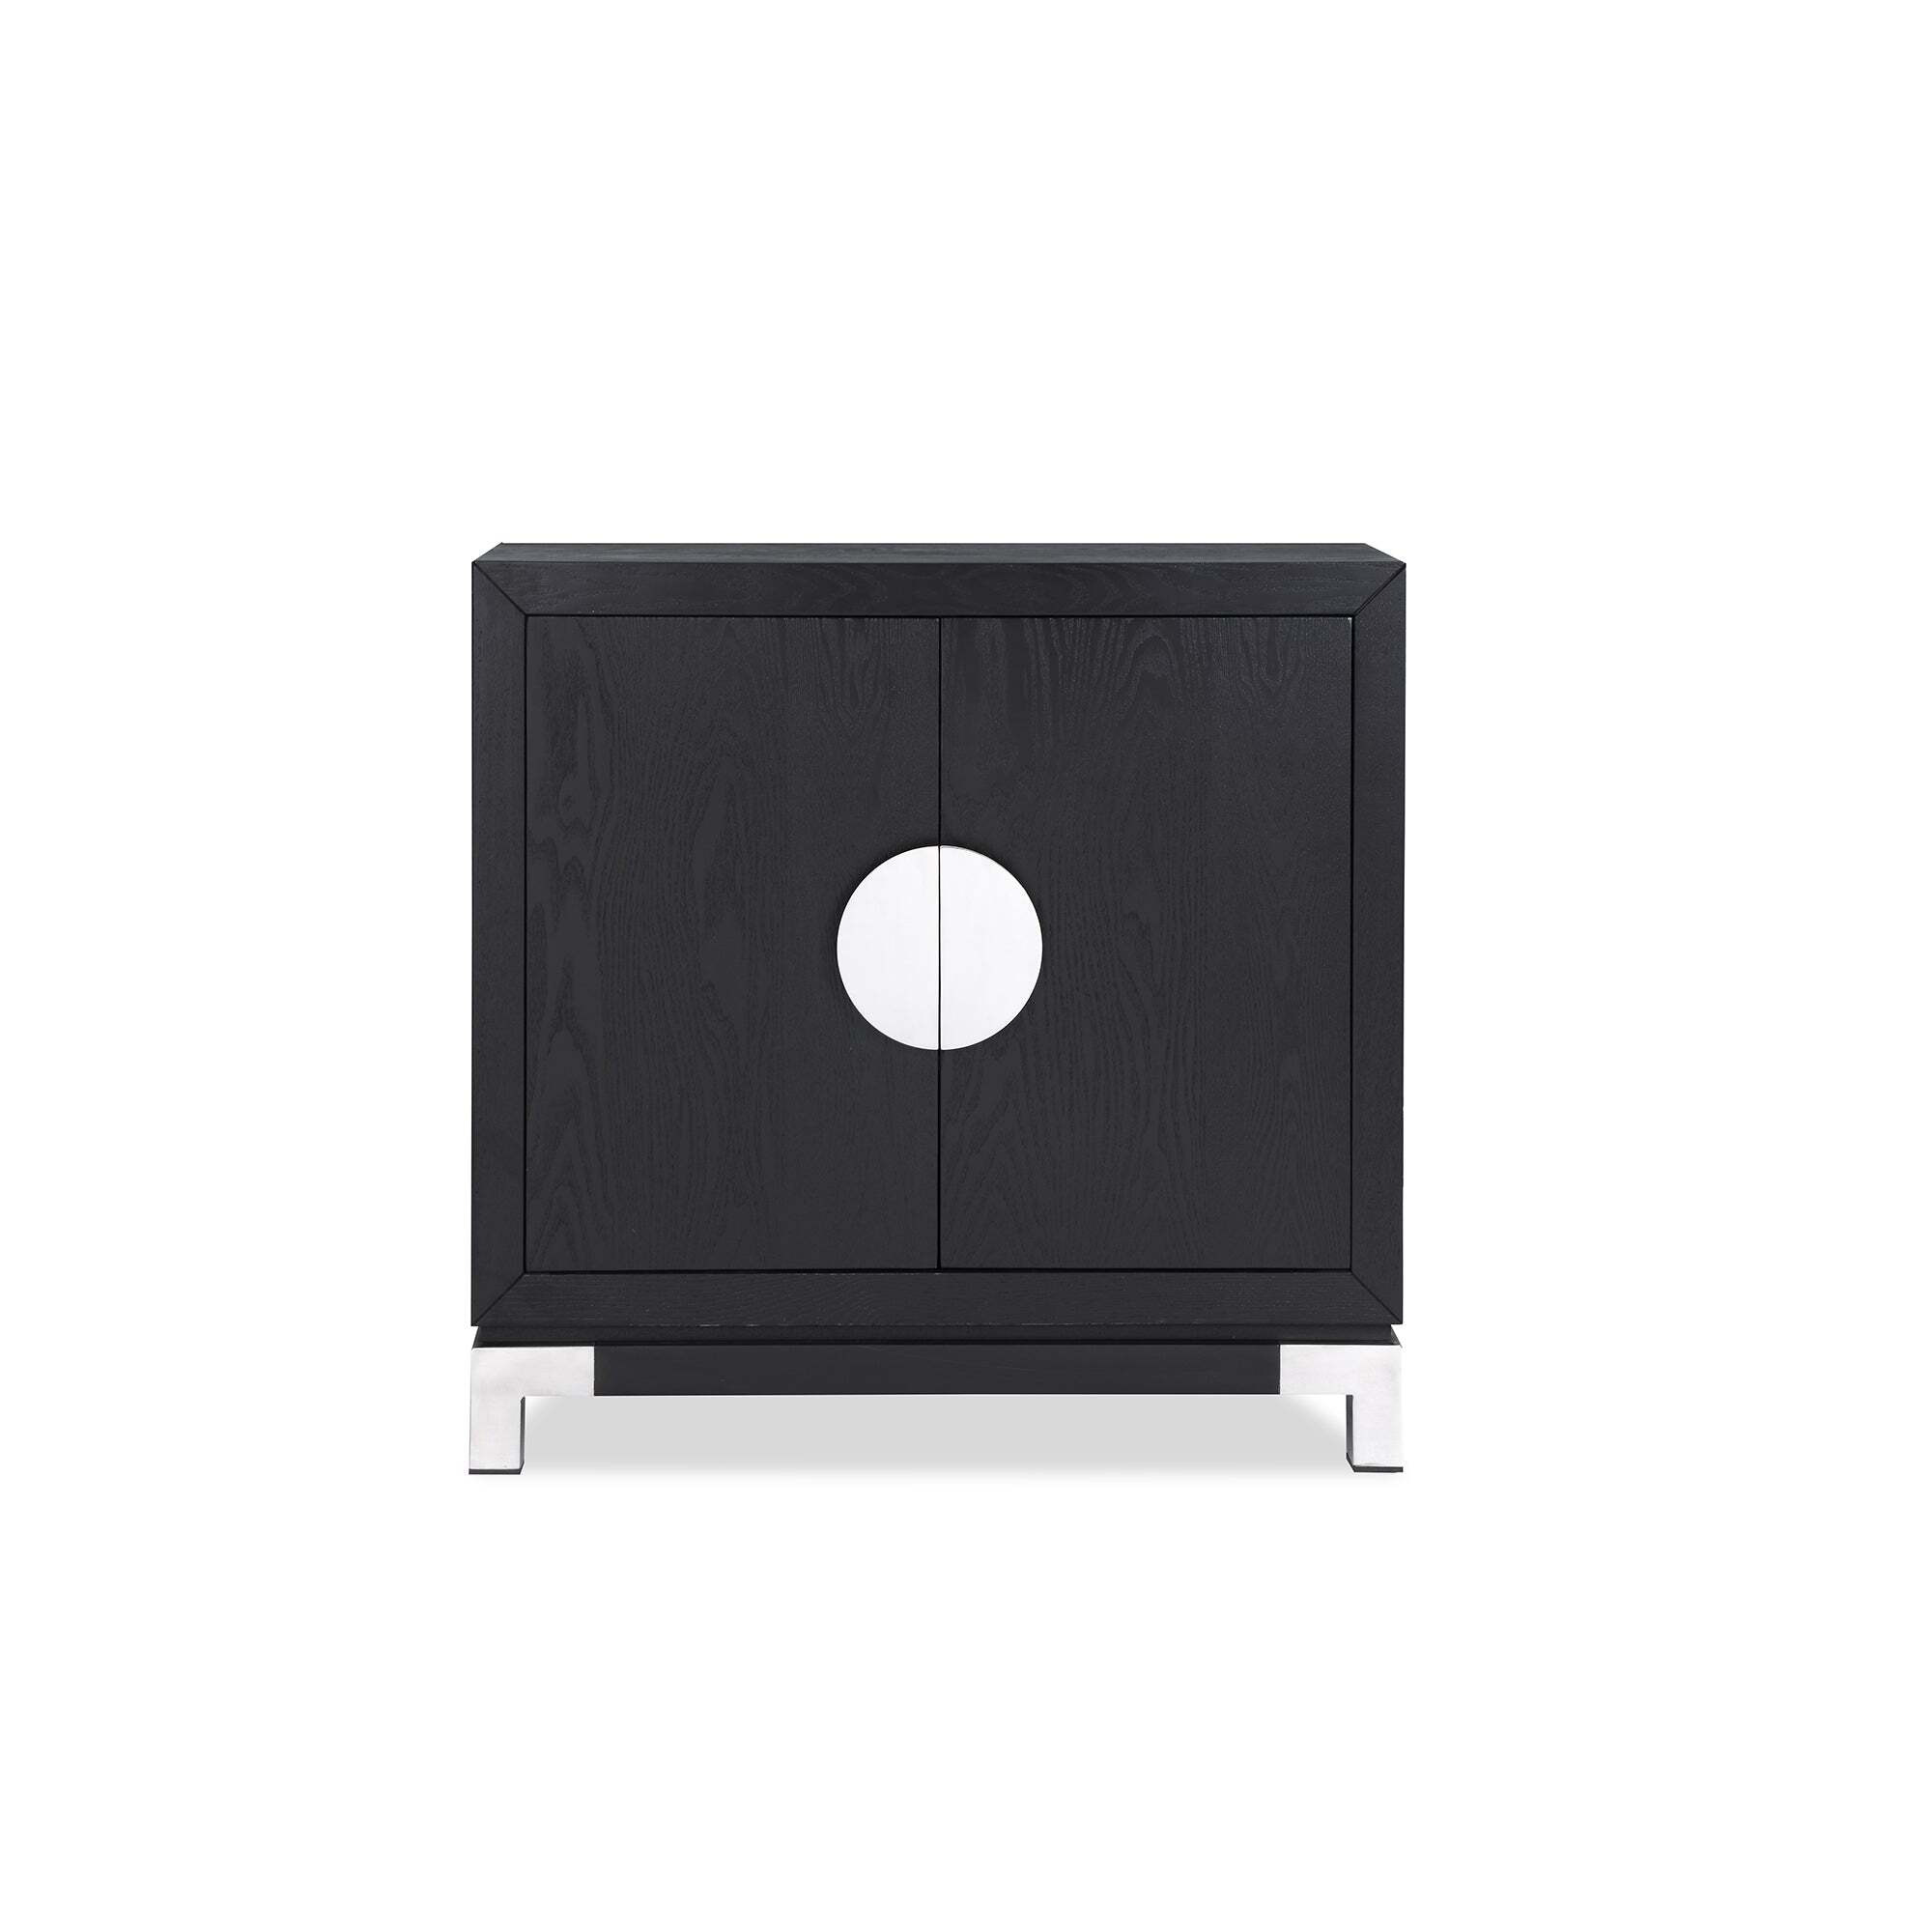 Liang & Eimil Otium Sideboard Polished Stainless Steel - image 1